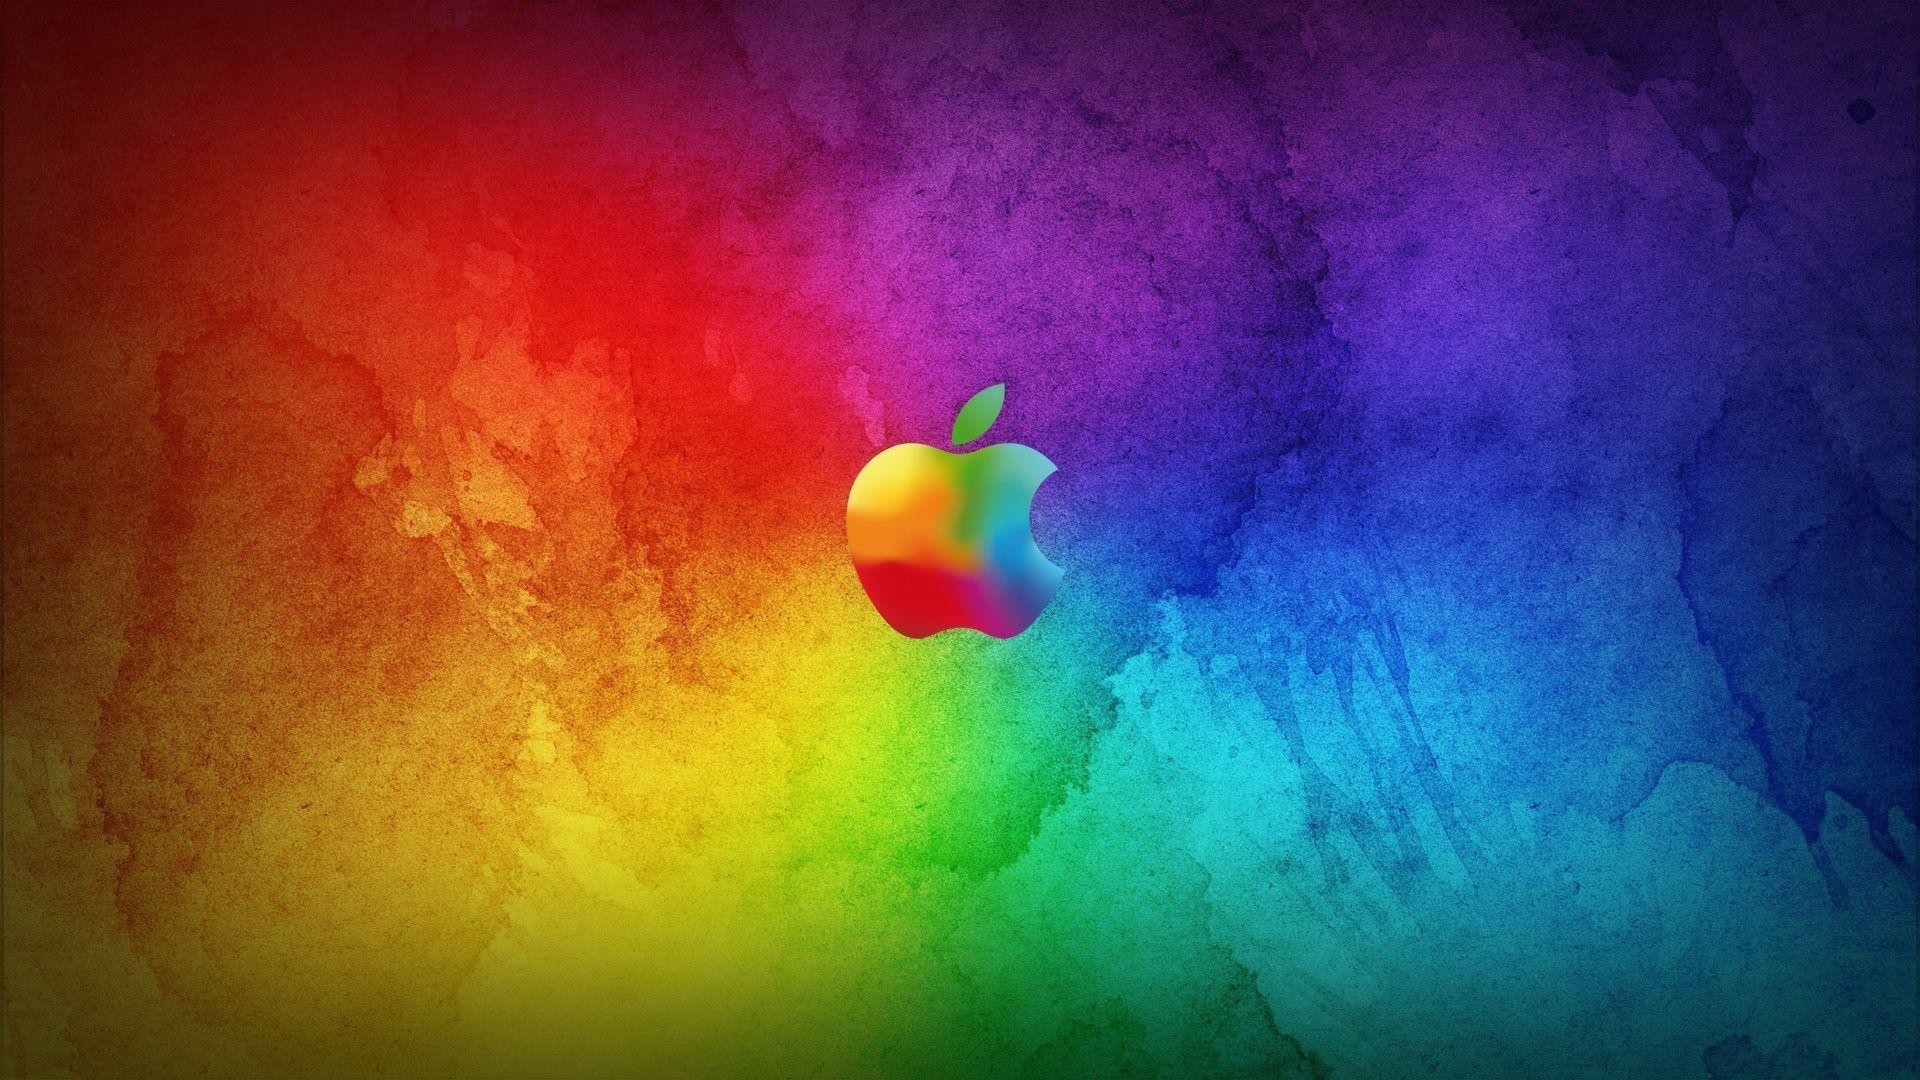 1920x1080 Download Amazing Colorful Apple Logo Wallpaper | Full HD Wallpapers